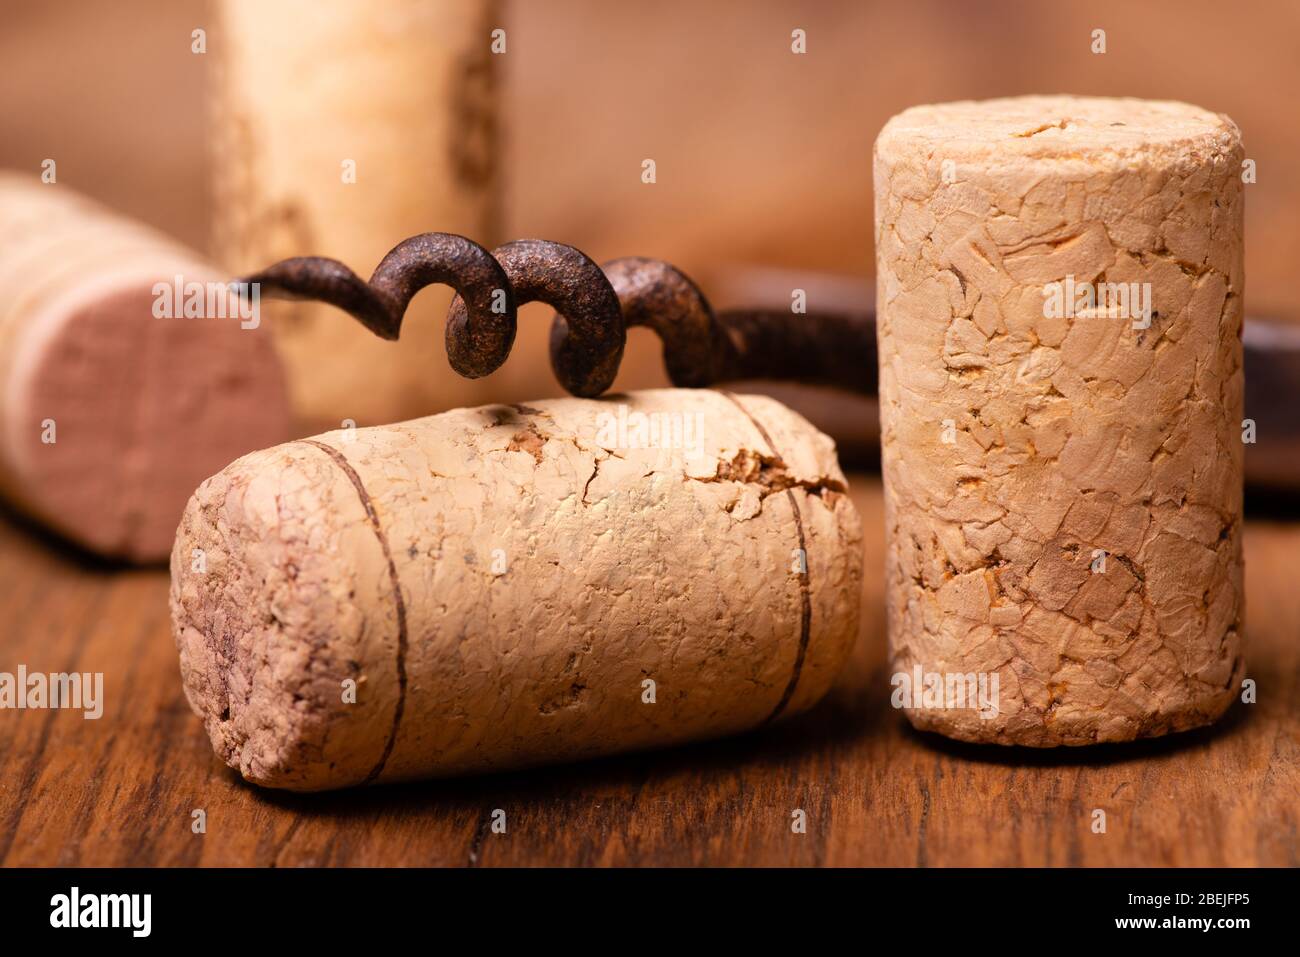 in the foreground, corks of Italian wine, and vintage corkscrews Stock Photo